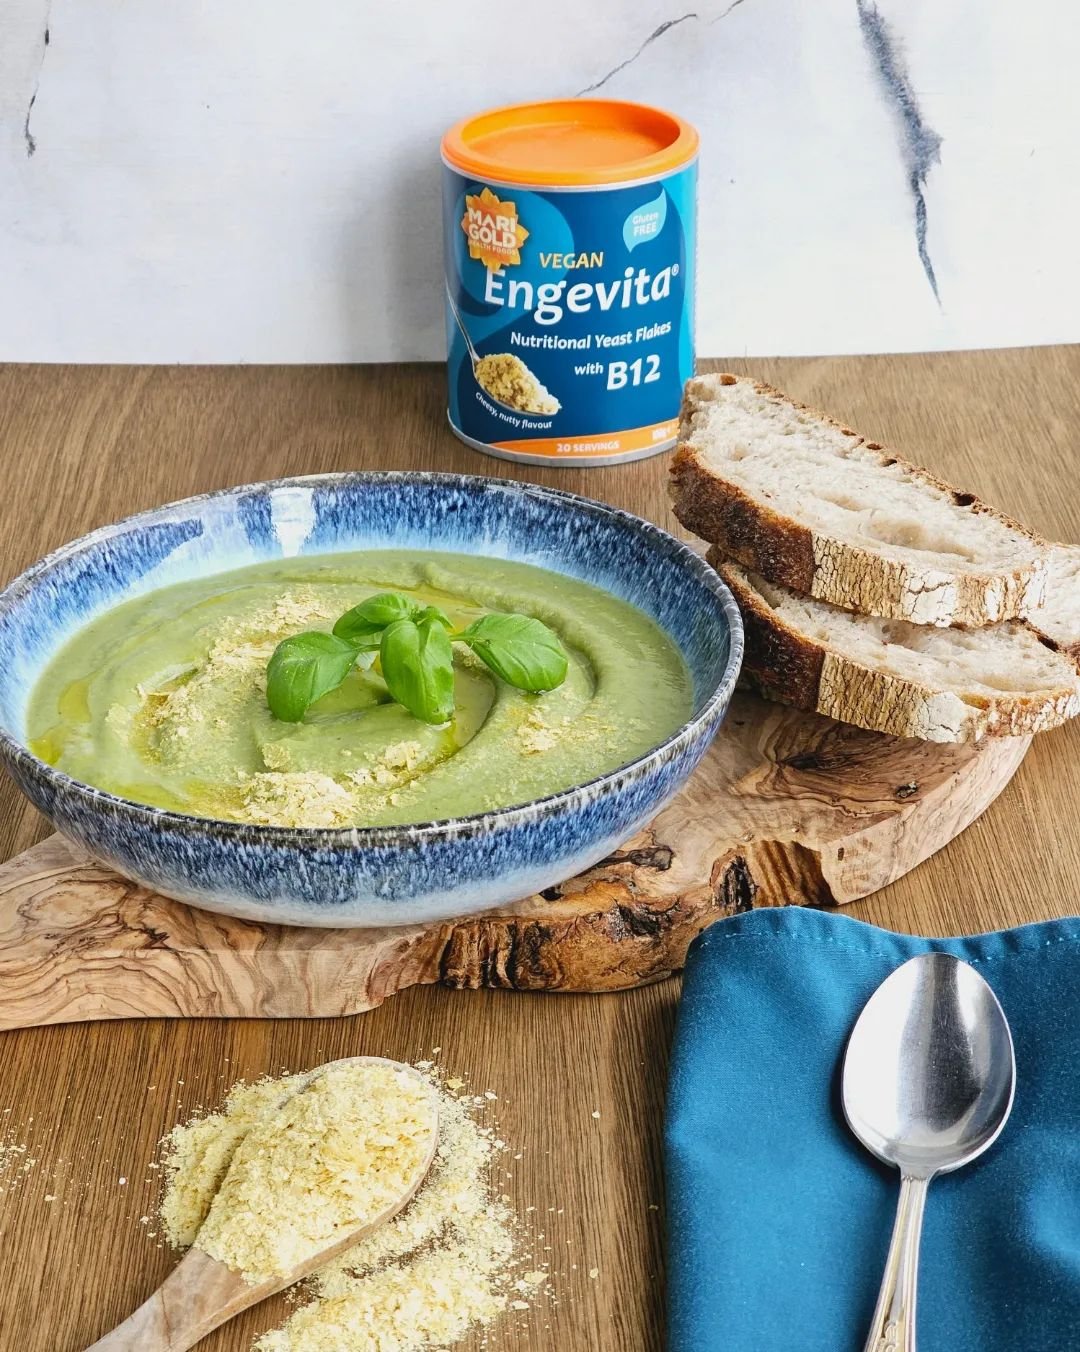 NOOCH UP YOUR SOUPS FOR EXTRA FLAVOUR
😛
Do you put olive oil and nooch on your bread, or nooch your soup direct as we have done here?

Which do you like to do most?

This was pea and spinach soup which we had cold as the sun was out (for once) and i